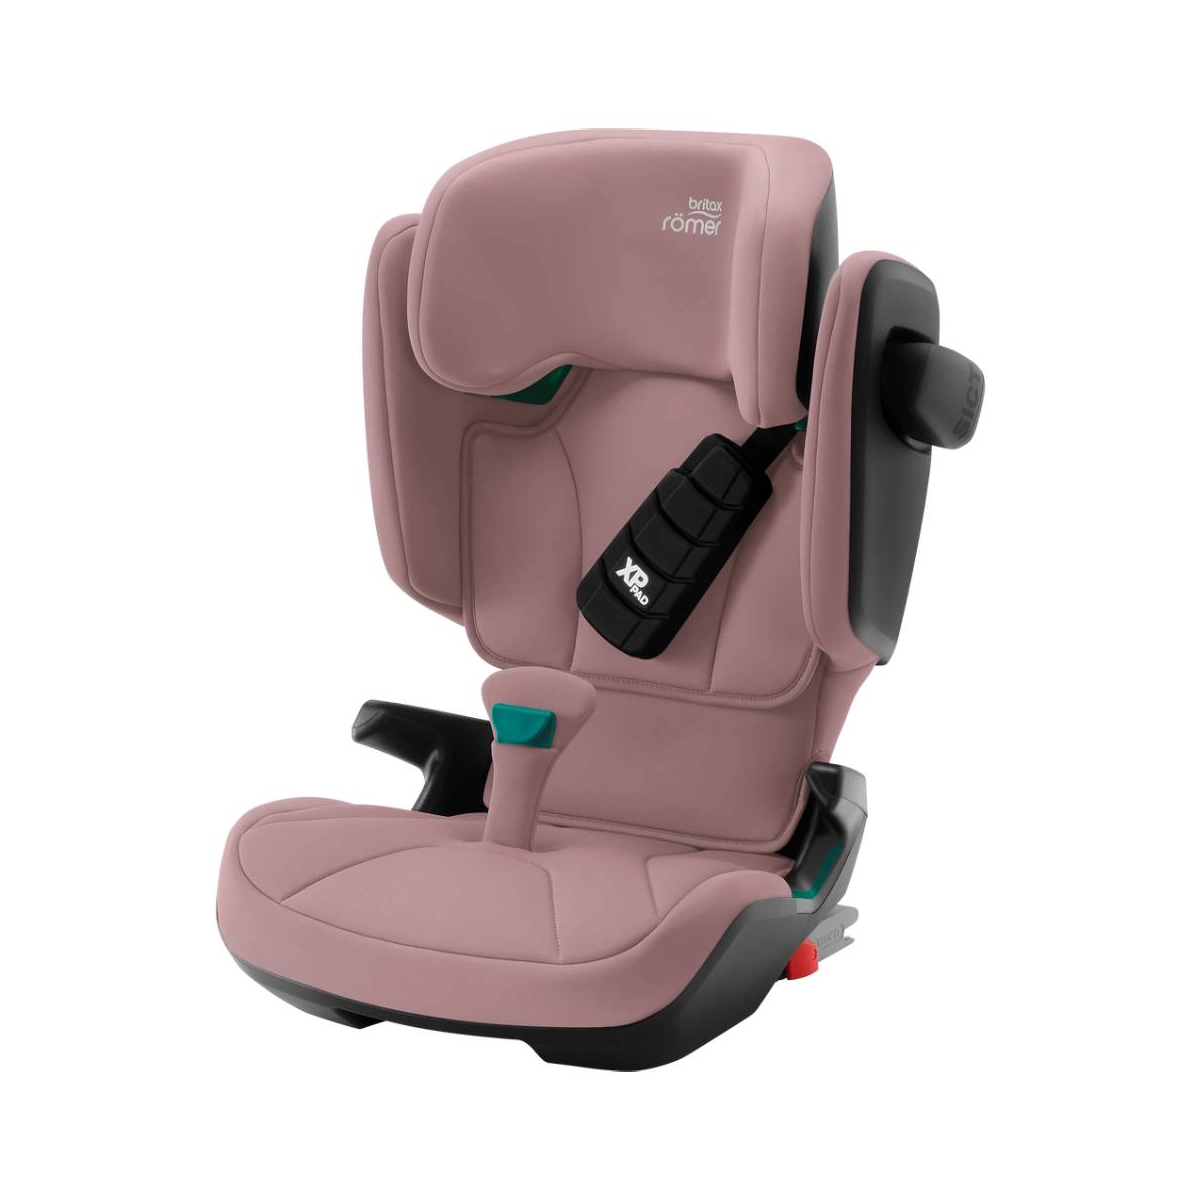 Image of Britax Kidfix i-Size Group 2/3 High Back Booster Car Seat - Dusty Rose